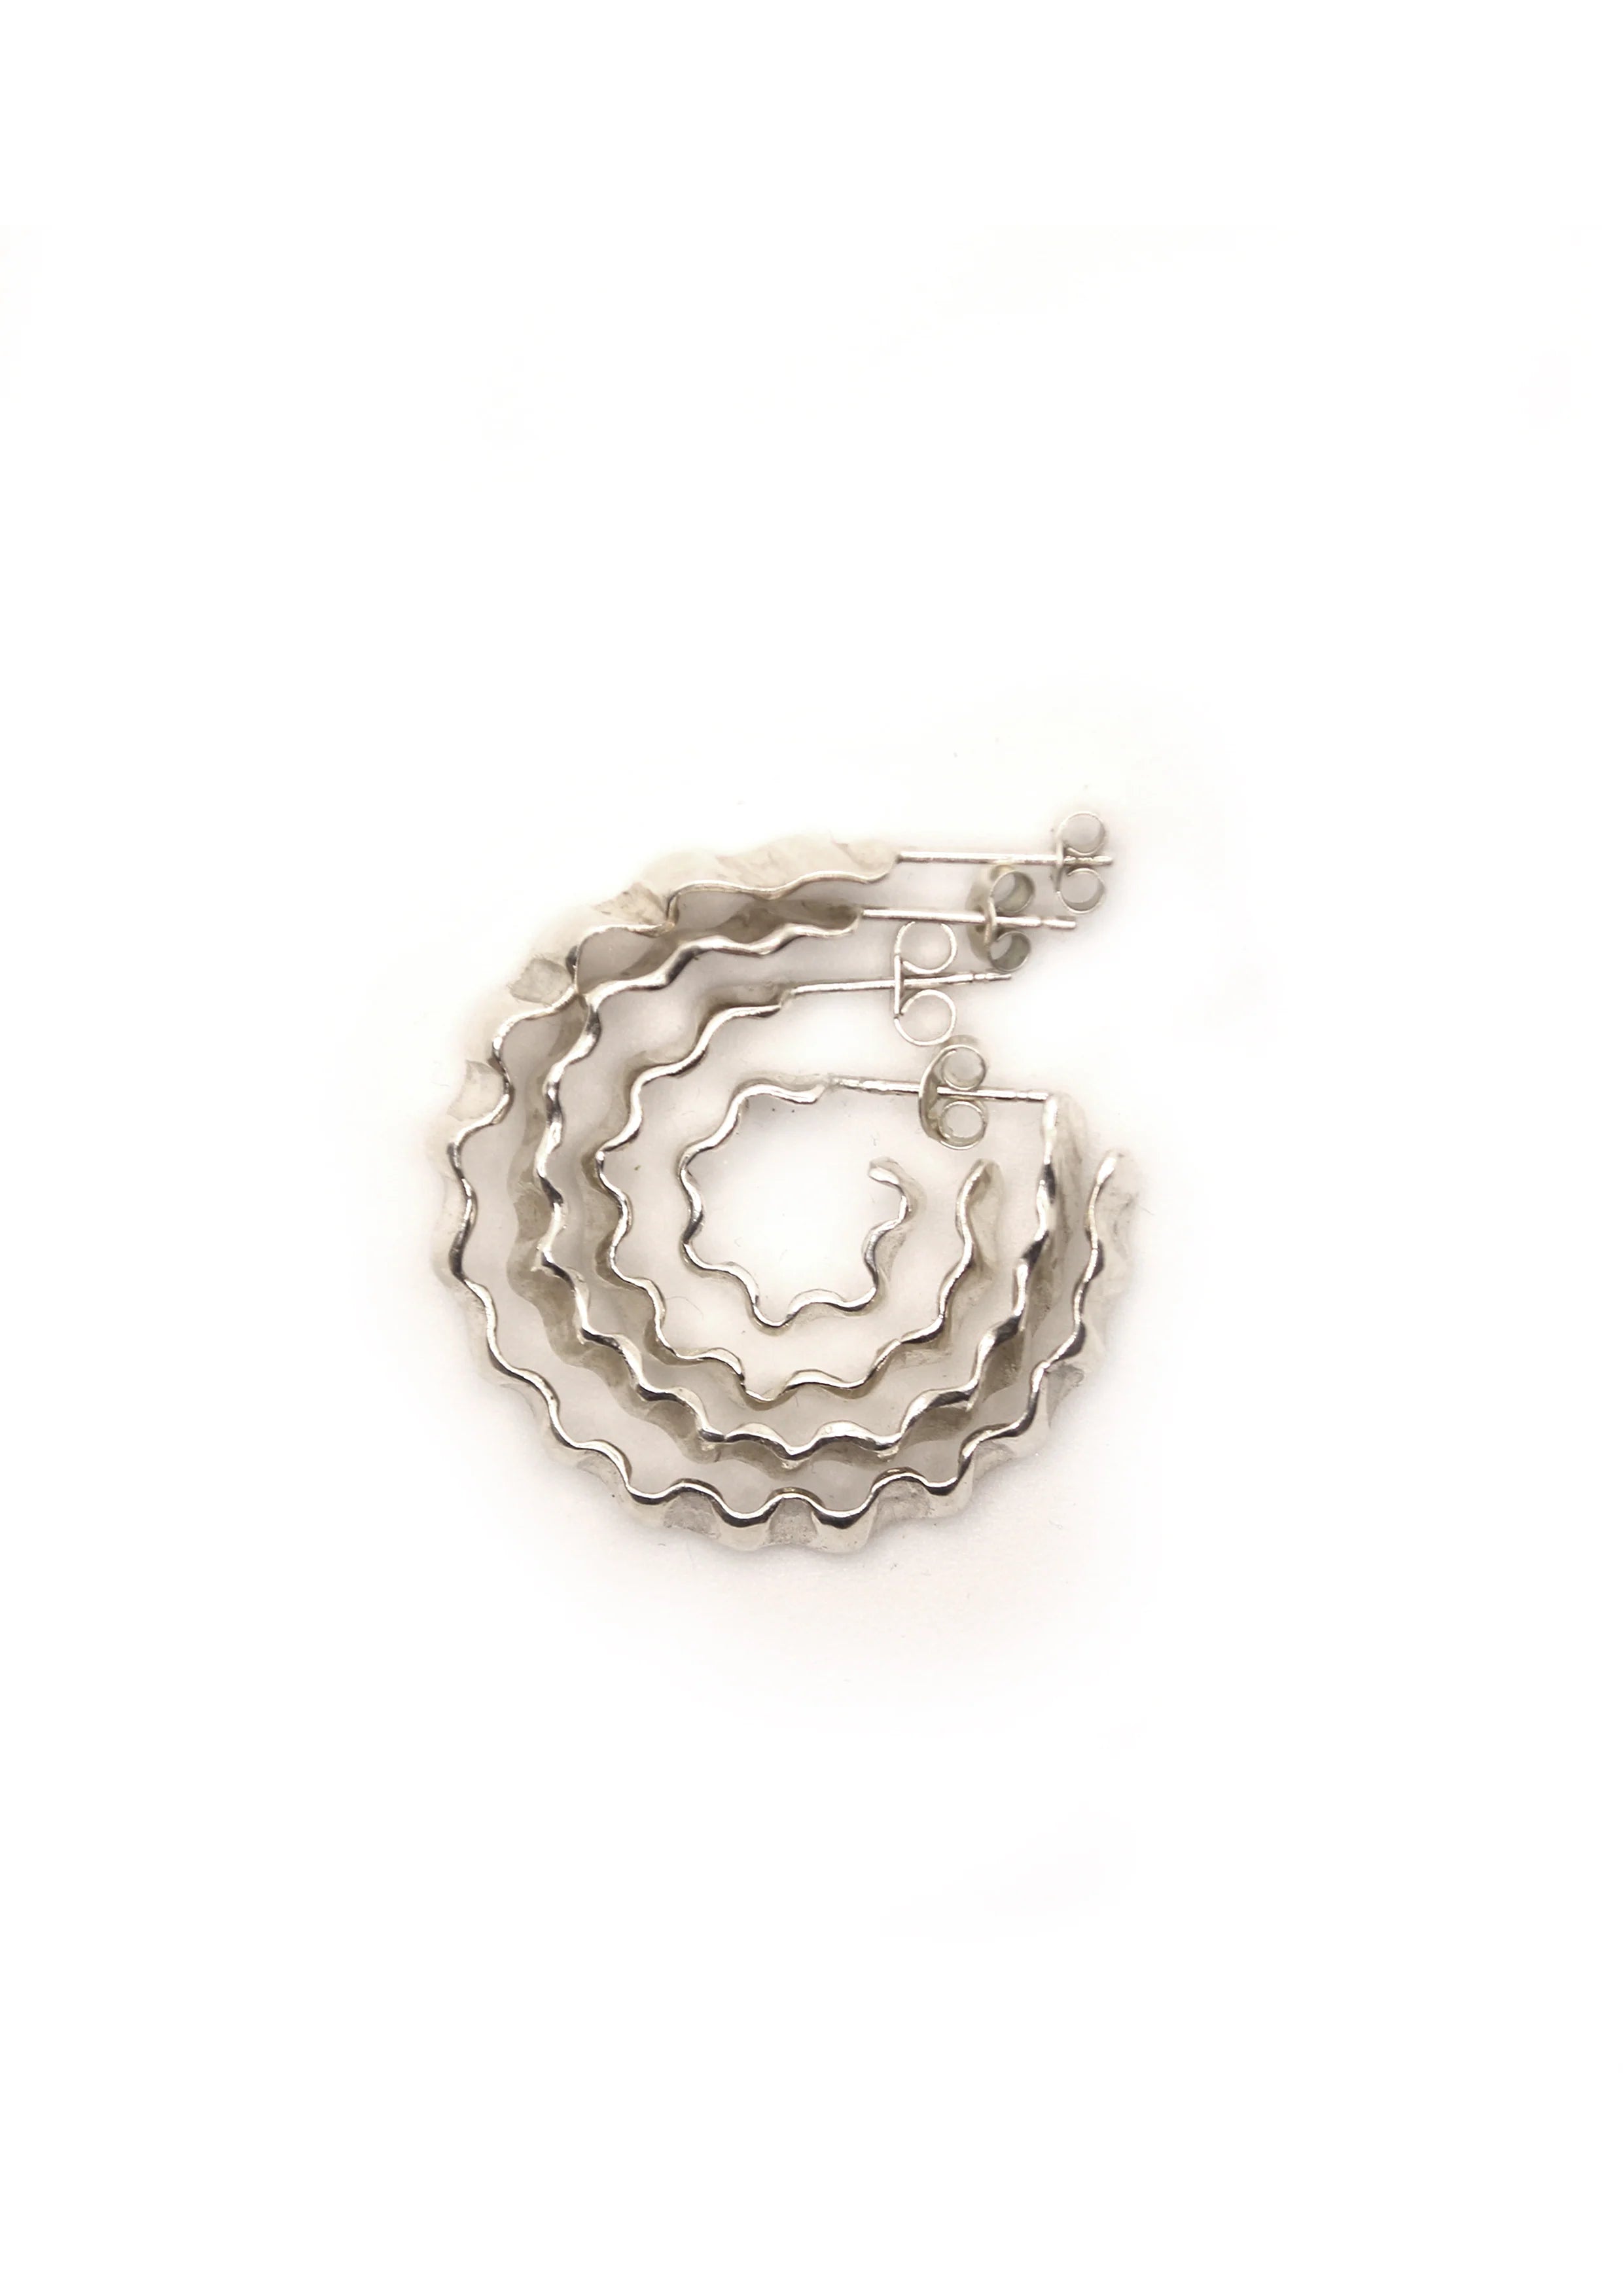 Mini Cockle Hoops in Silver or Gold by Hannah Bourn - Lifestory